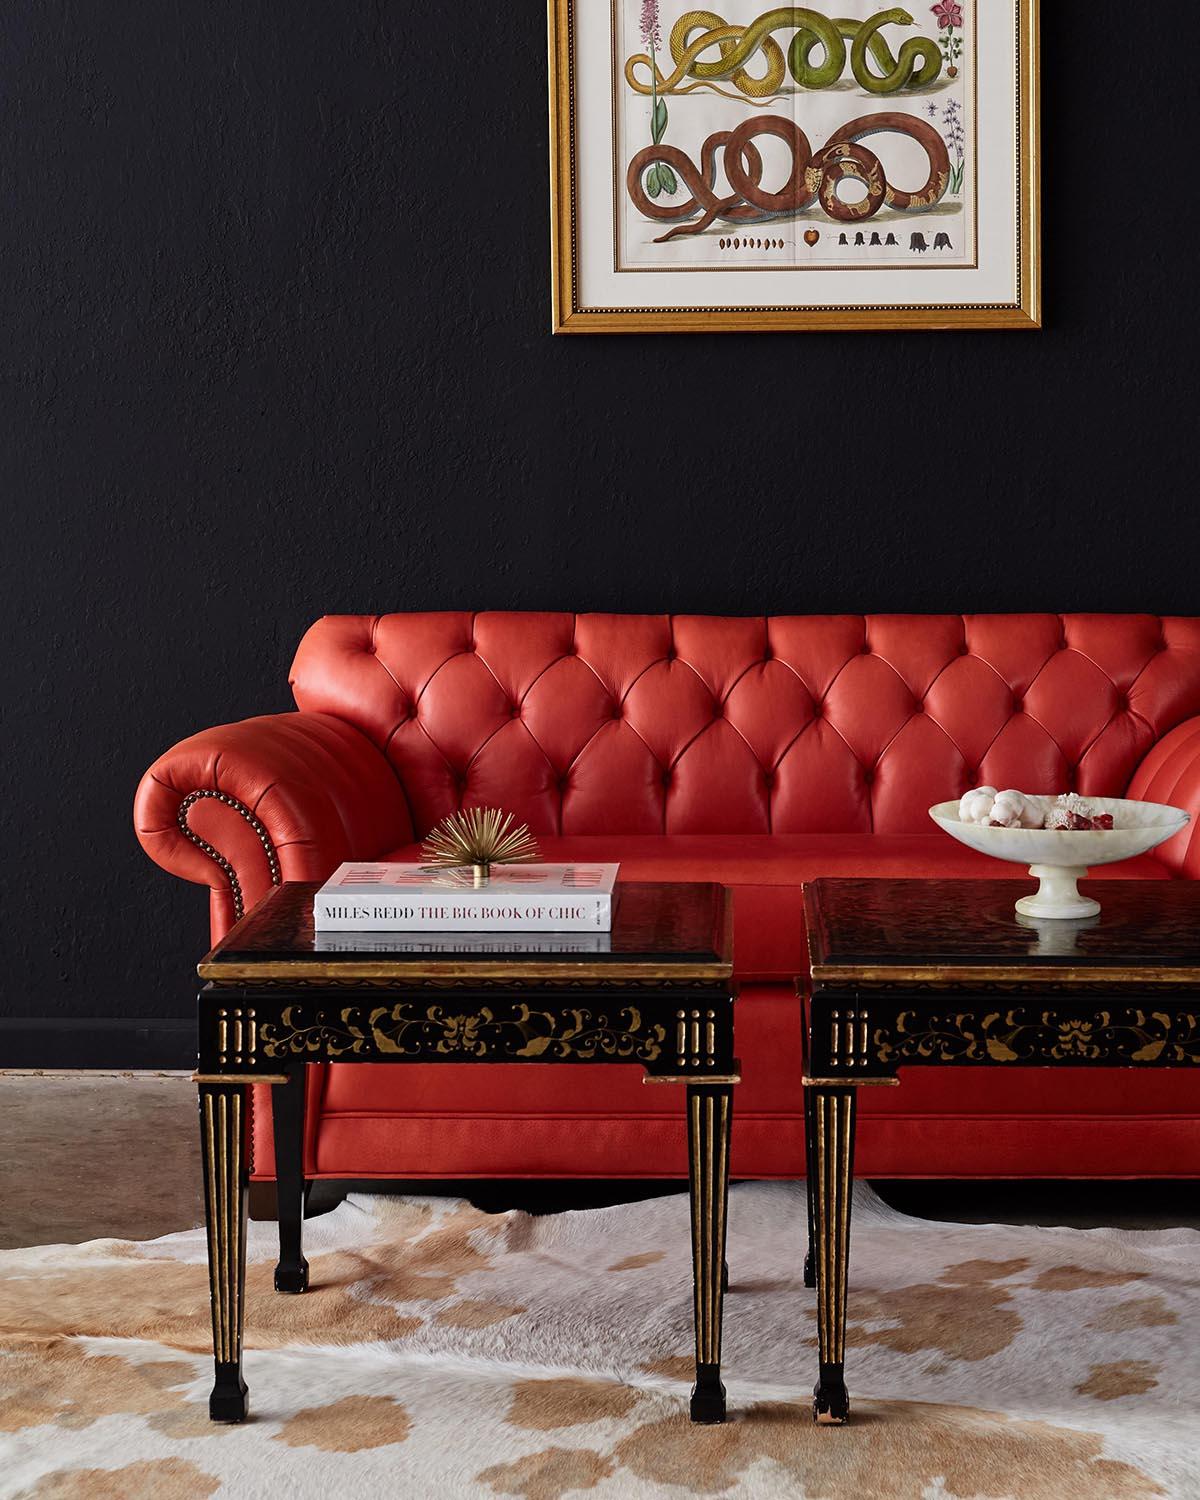 Fantastic tufted leather chesterfield sofa settee or loveseat featuring a stylish coral red leather. Deep generous seating area flanked by English style rolled arms with brass nail head trim accents. Constructed with a hardwood frame and upholstered